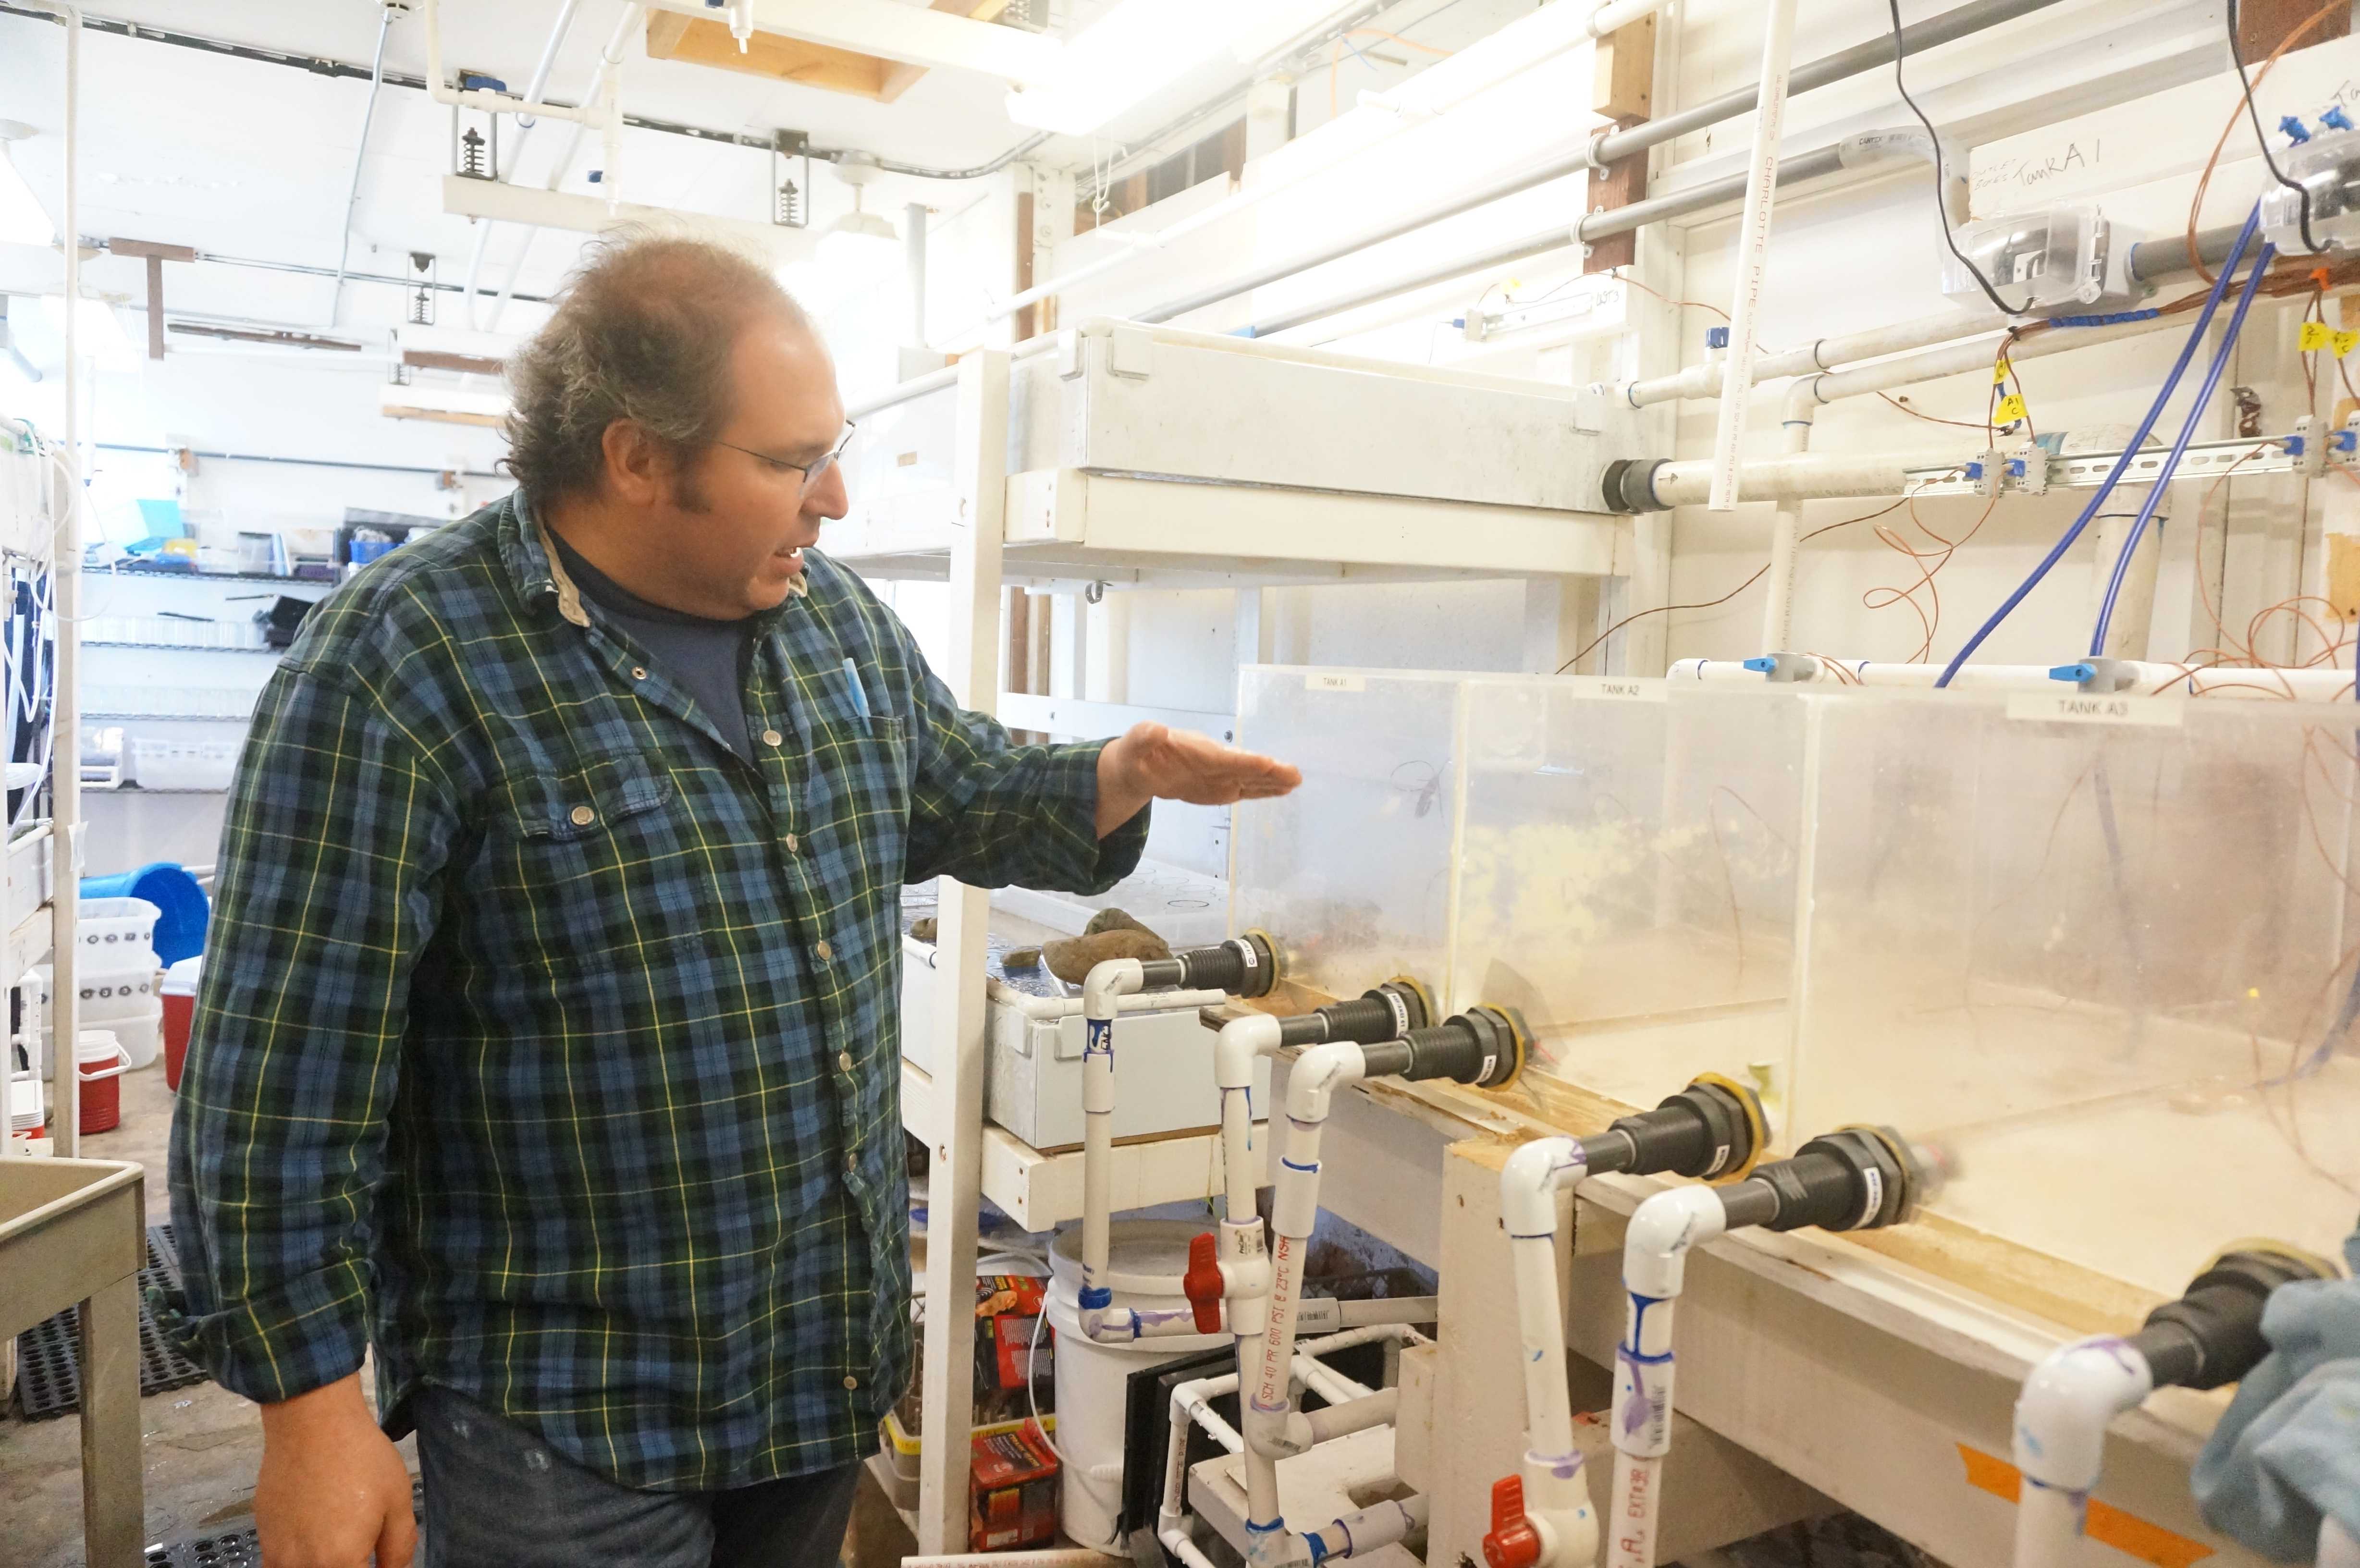 Jonathan Stillman shows how the automatic system of aquarium works in Romberg Tiburon Center on March 31. 